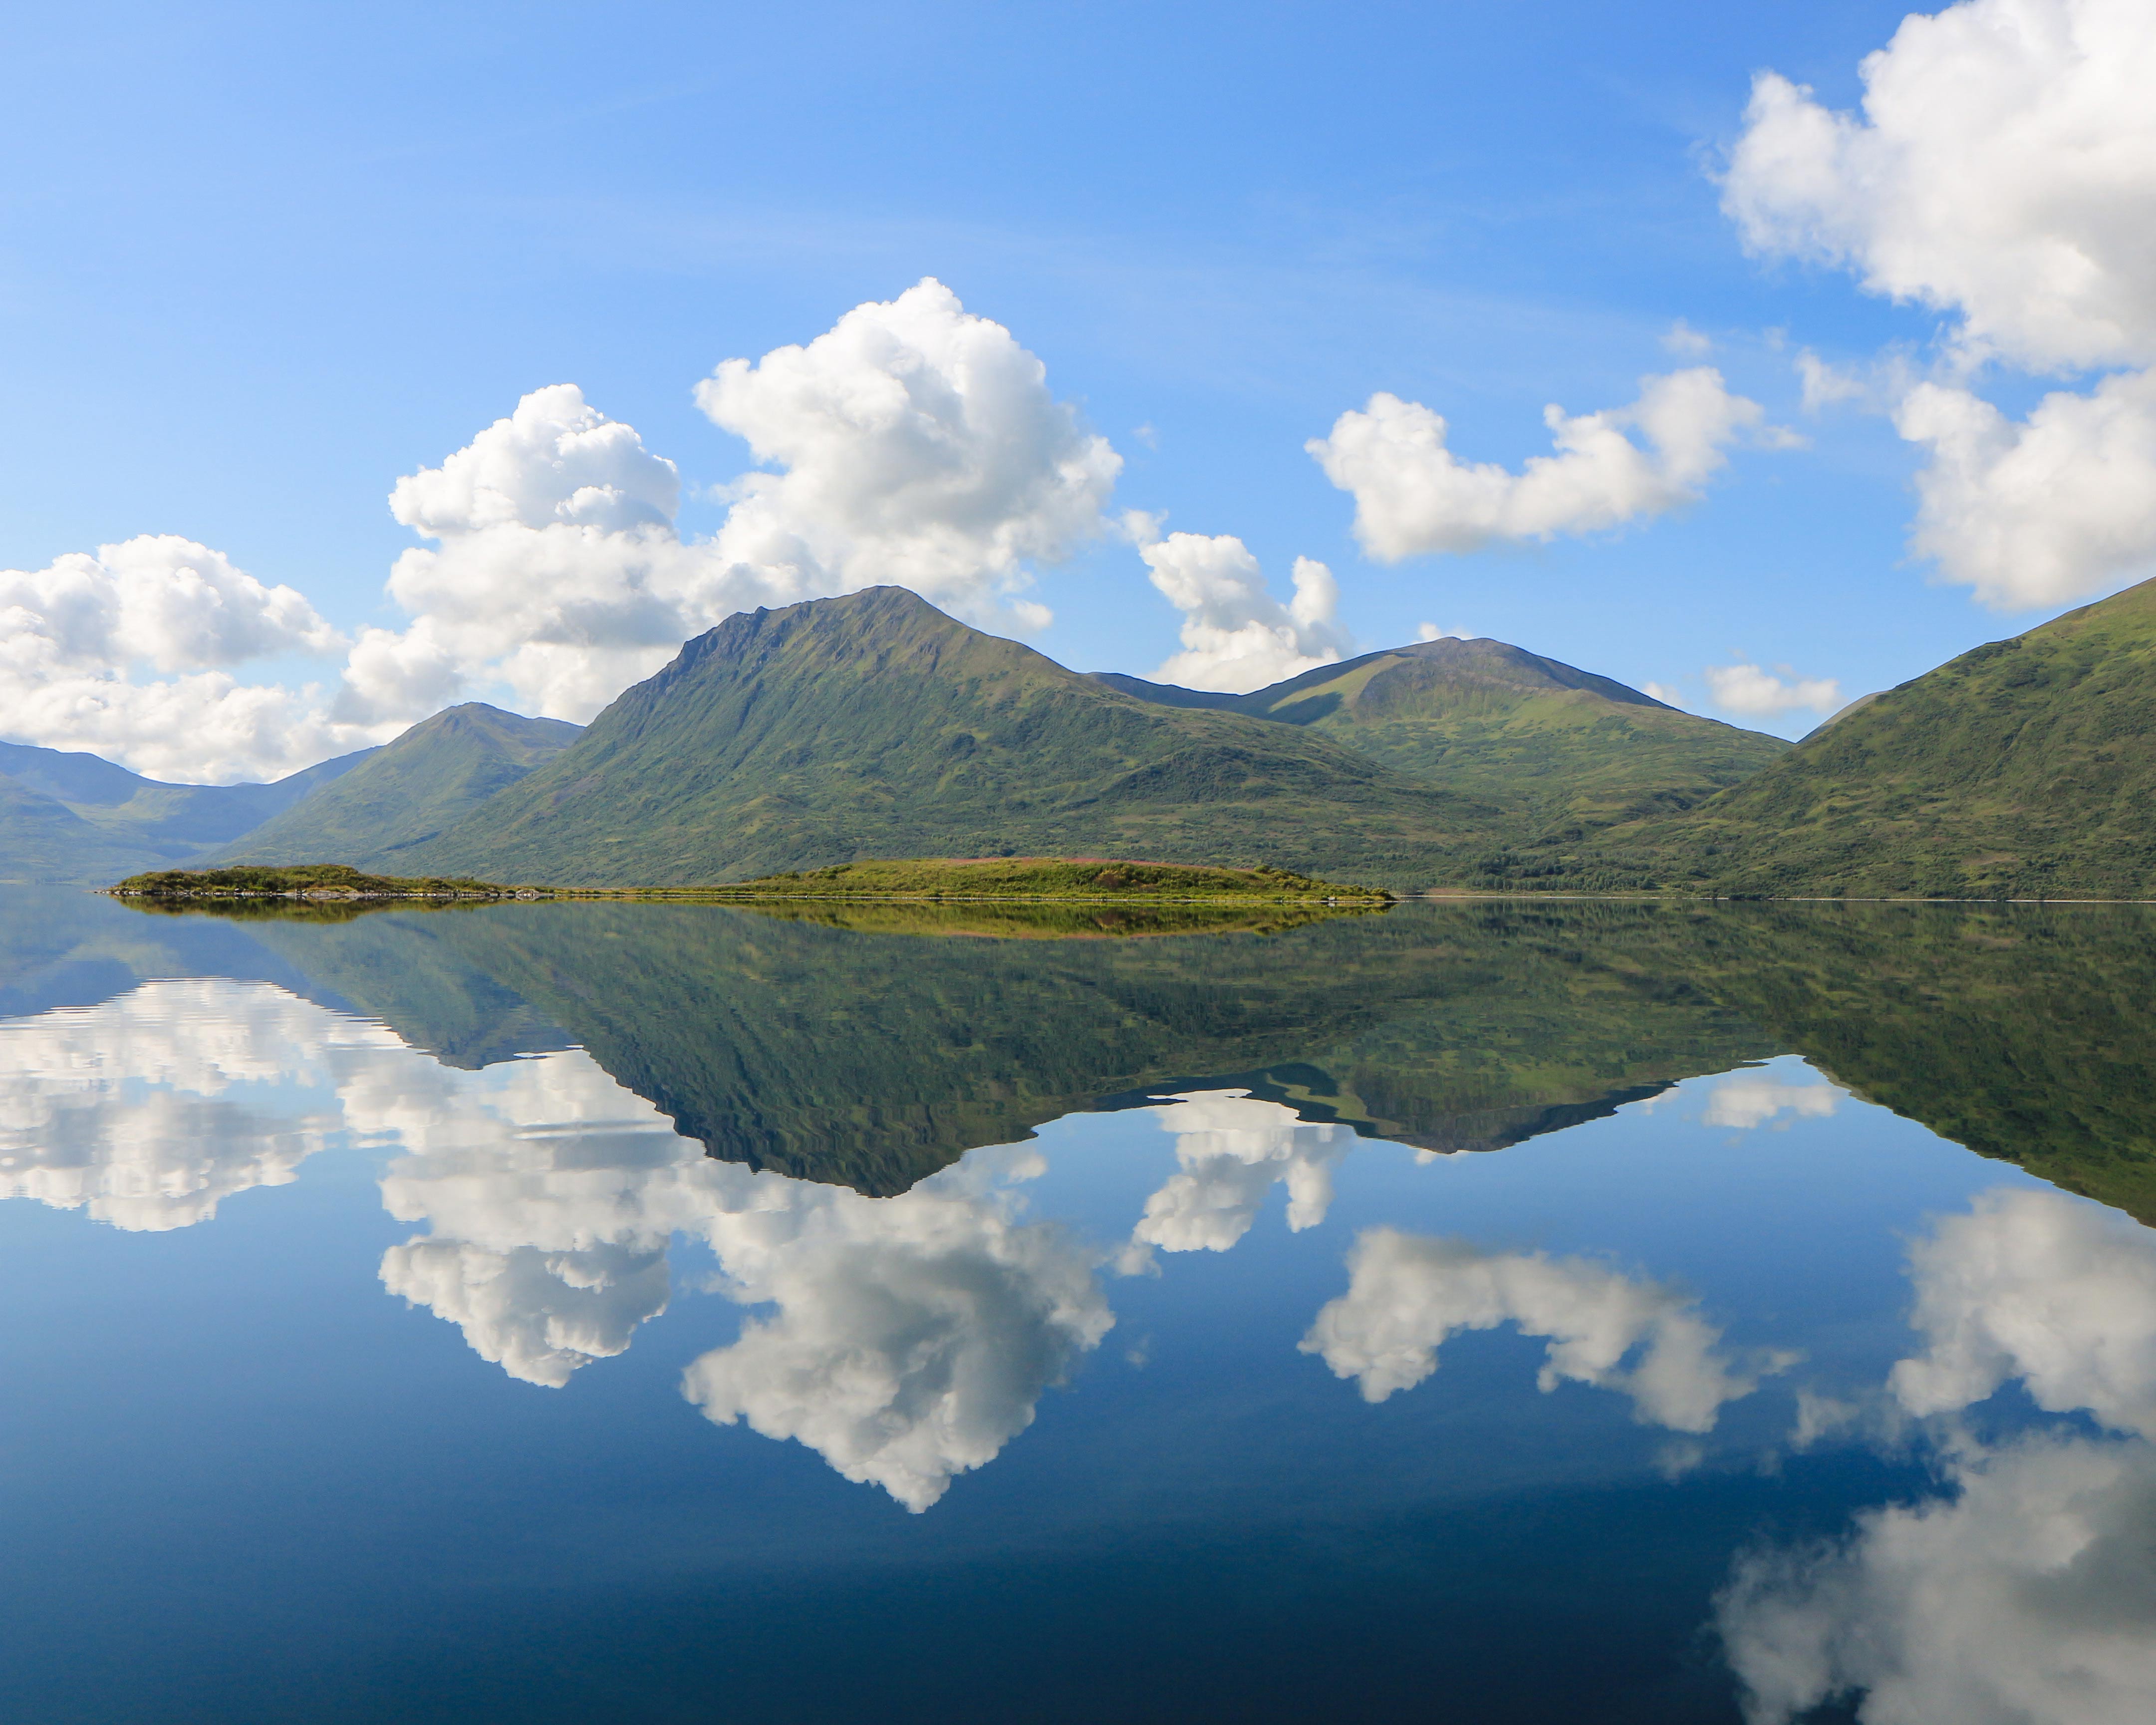 Bear watching on Kodiak Island: picturesque lake reflecting the mountains and blue sky.